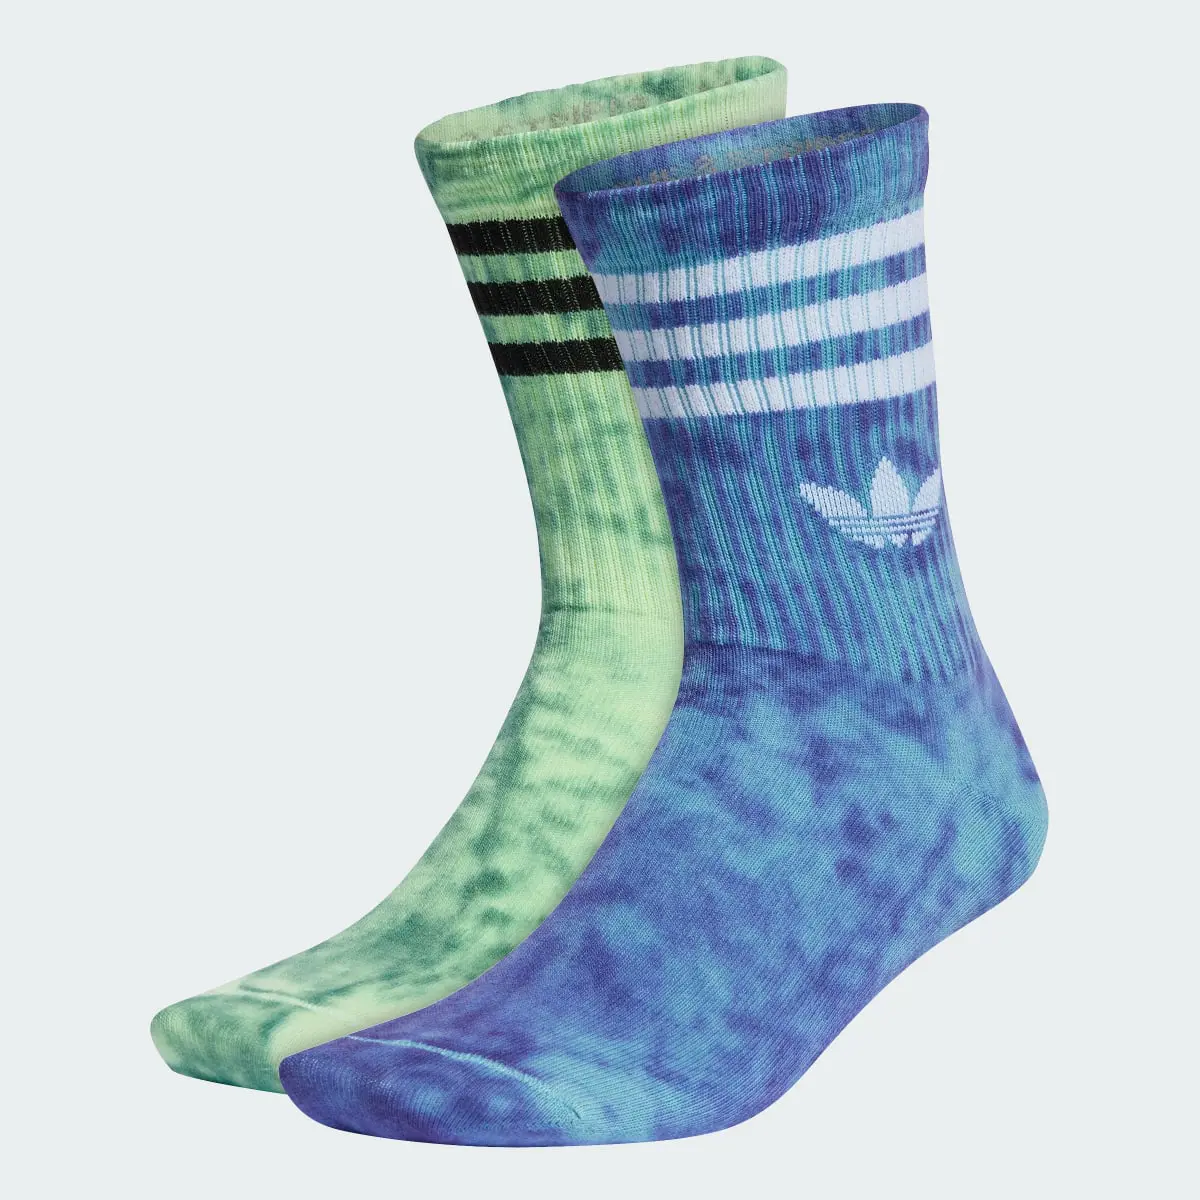 Adidas Chaussettes Tie Dye (2 paires). 2